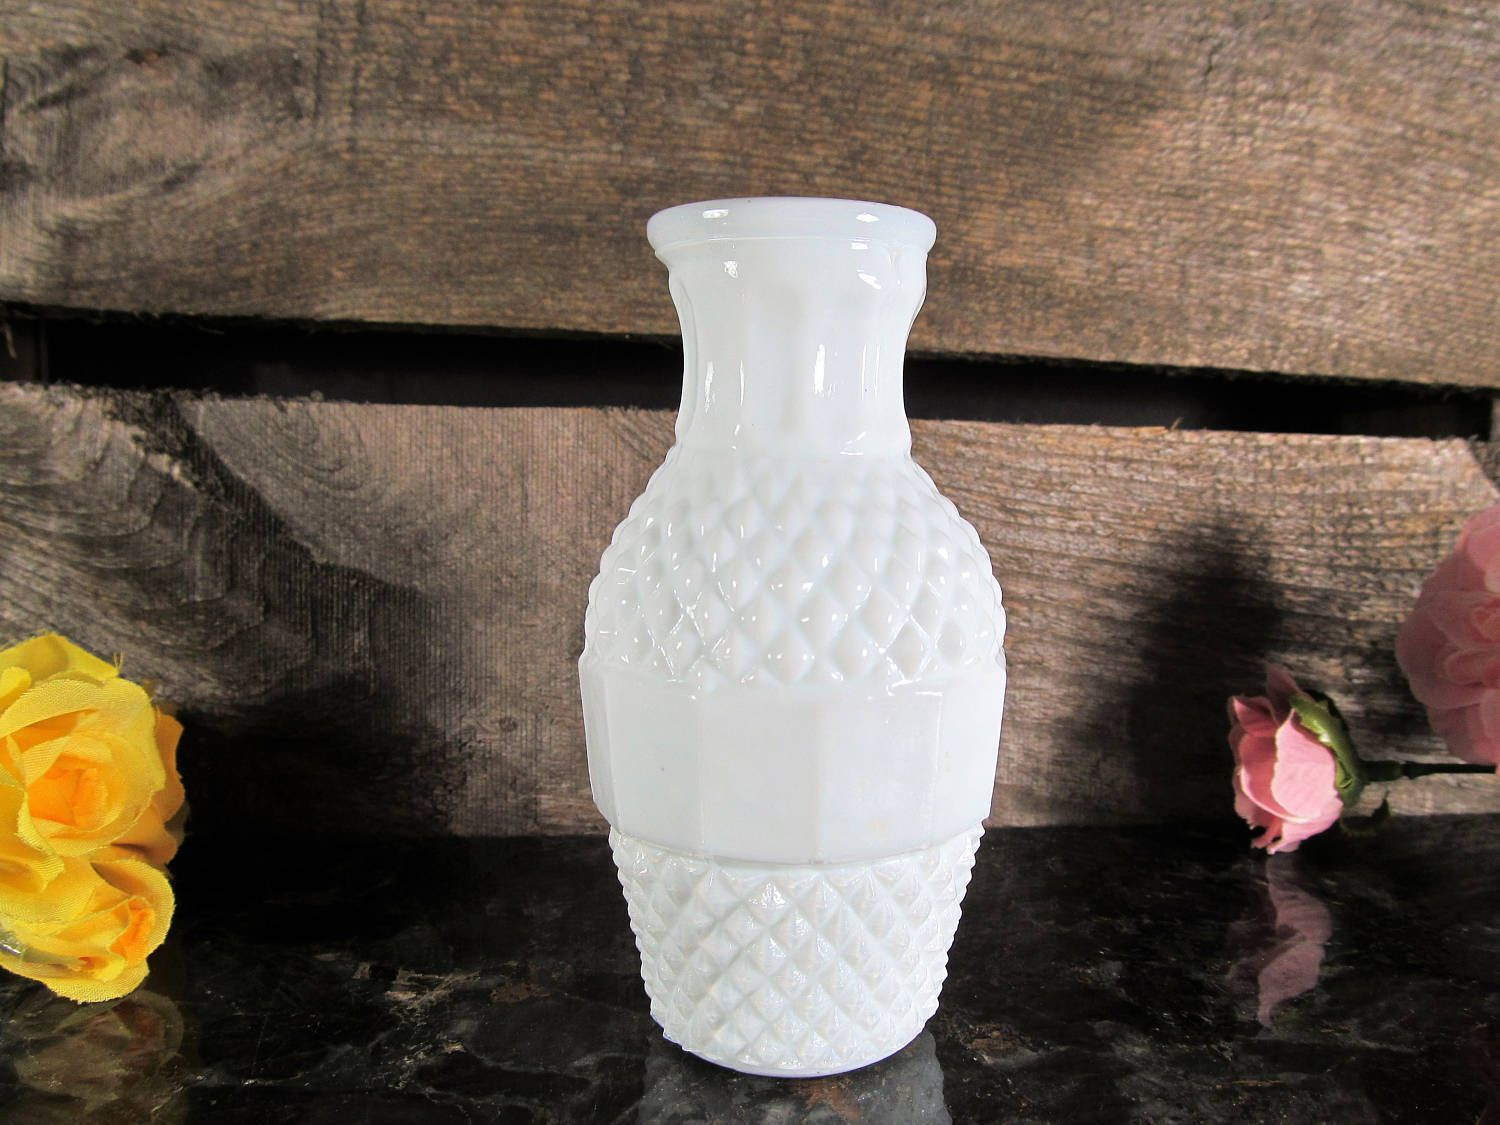 28 Cute Mini White Bud Vases 2024 free download mini white bud vases of small white milk glass bud vase miniature floral vase retro home within small white milk glass bud vase miniature floral vase retro home and office decor vintage farm